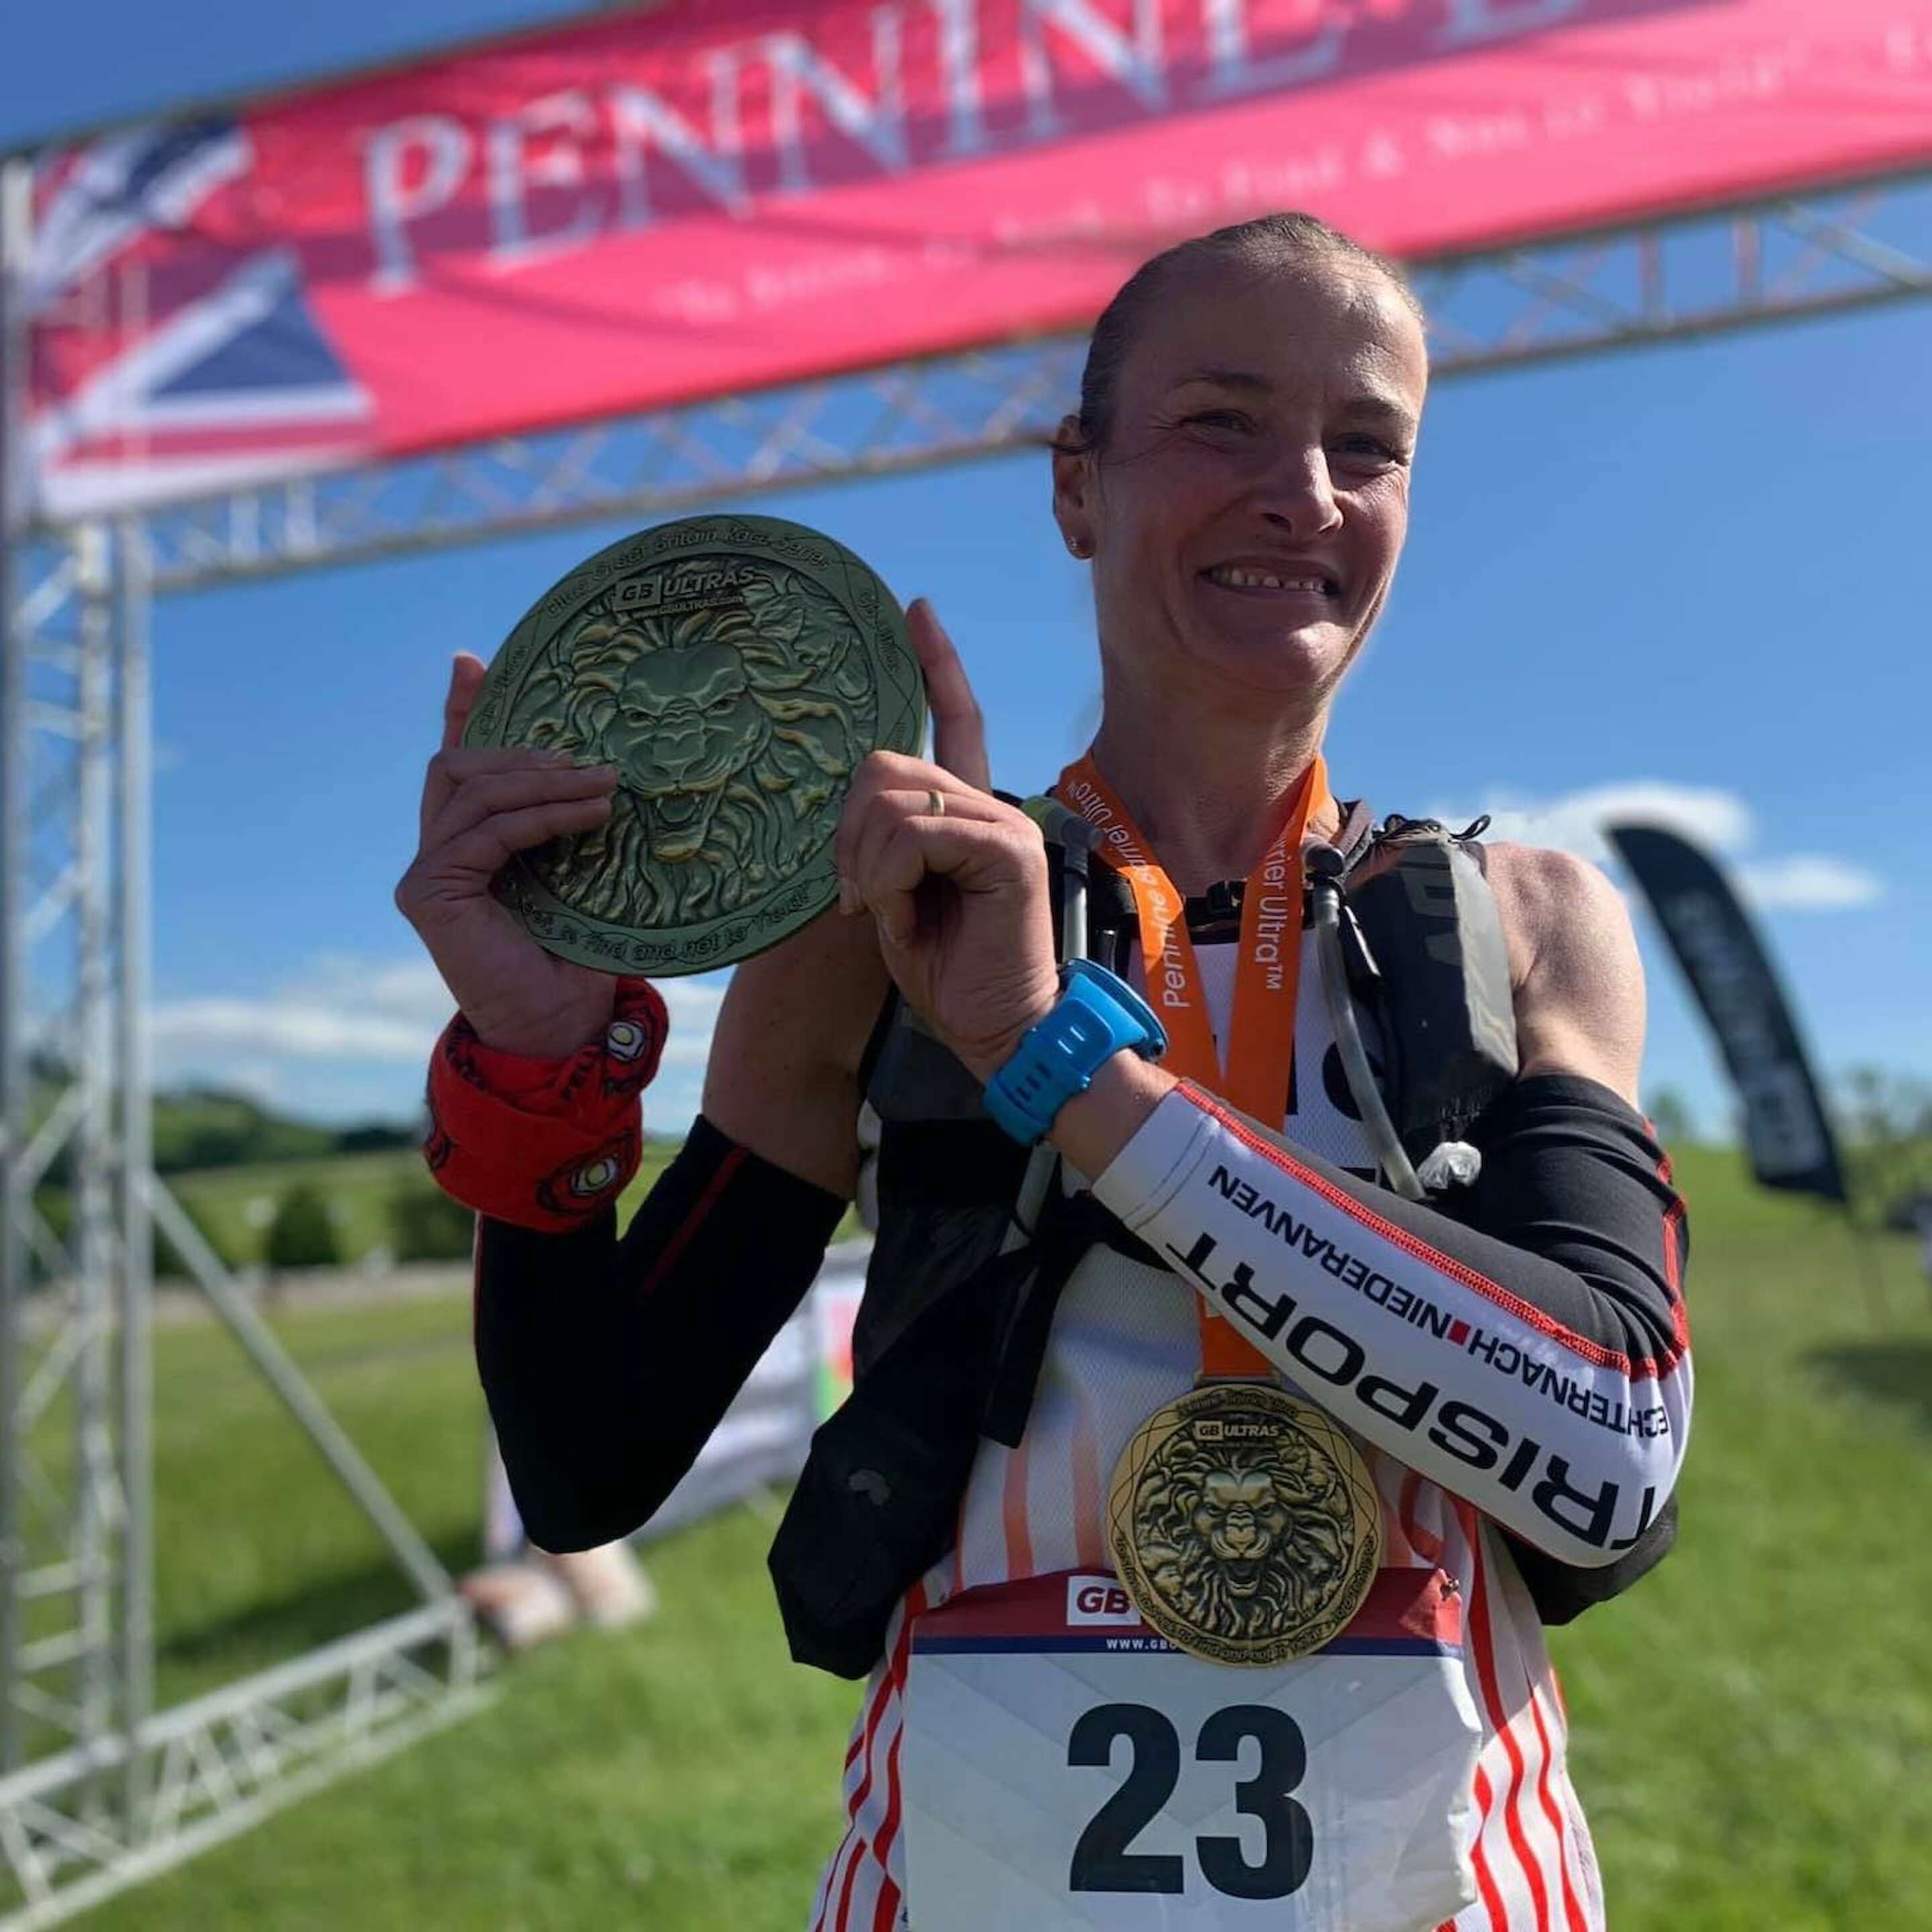 Lorraine Slater 1st lady and new CR Pennine Barrier Ultra